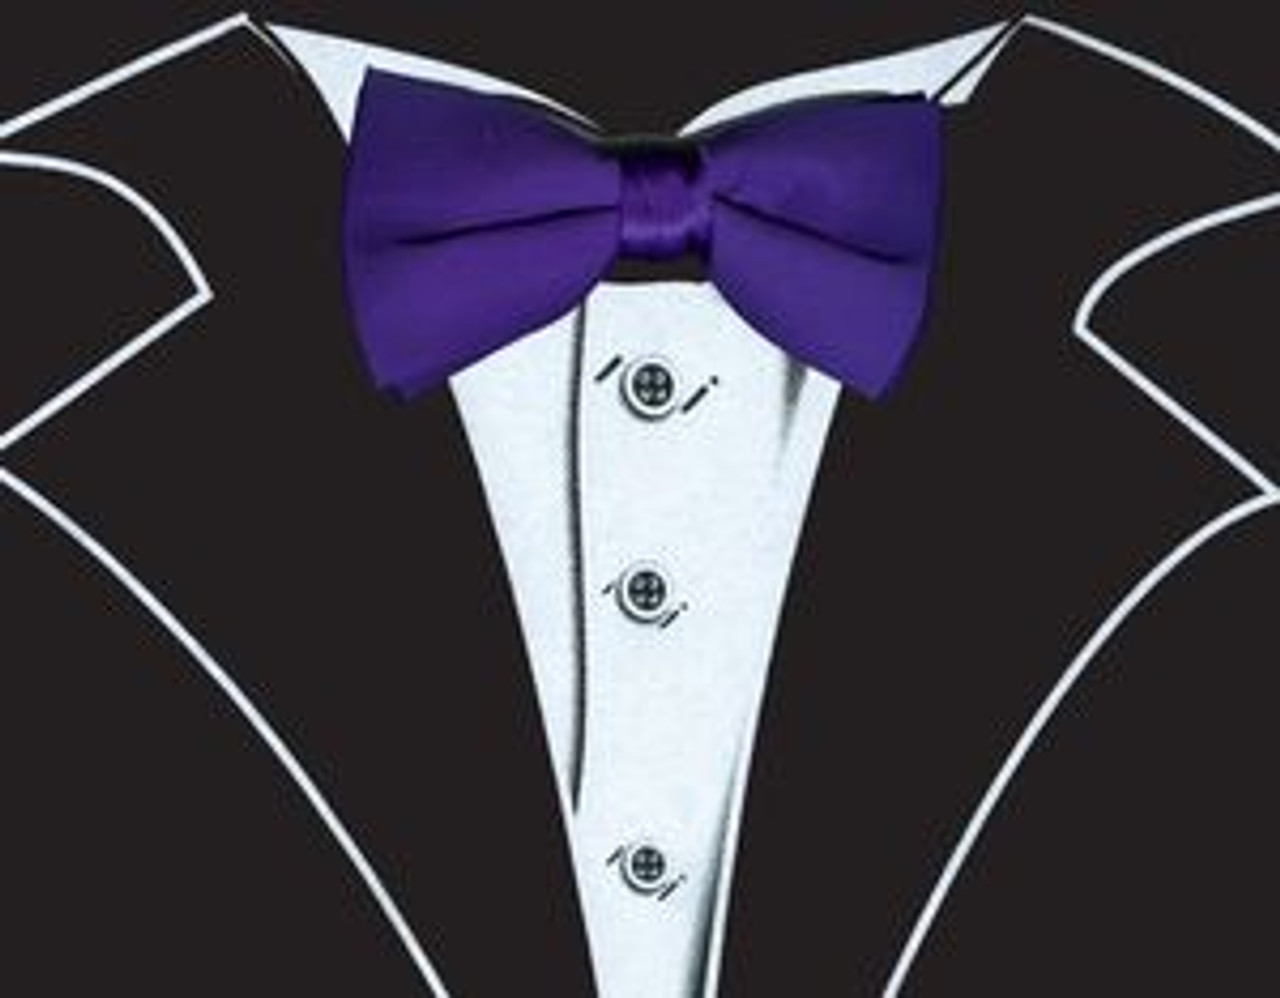 Tuxedo T Shirt In Black With Real Purple Bow Tie Shop Men S Tuxedo Tees - black bow tie t shirt roblox